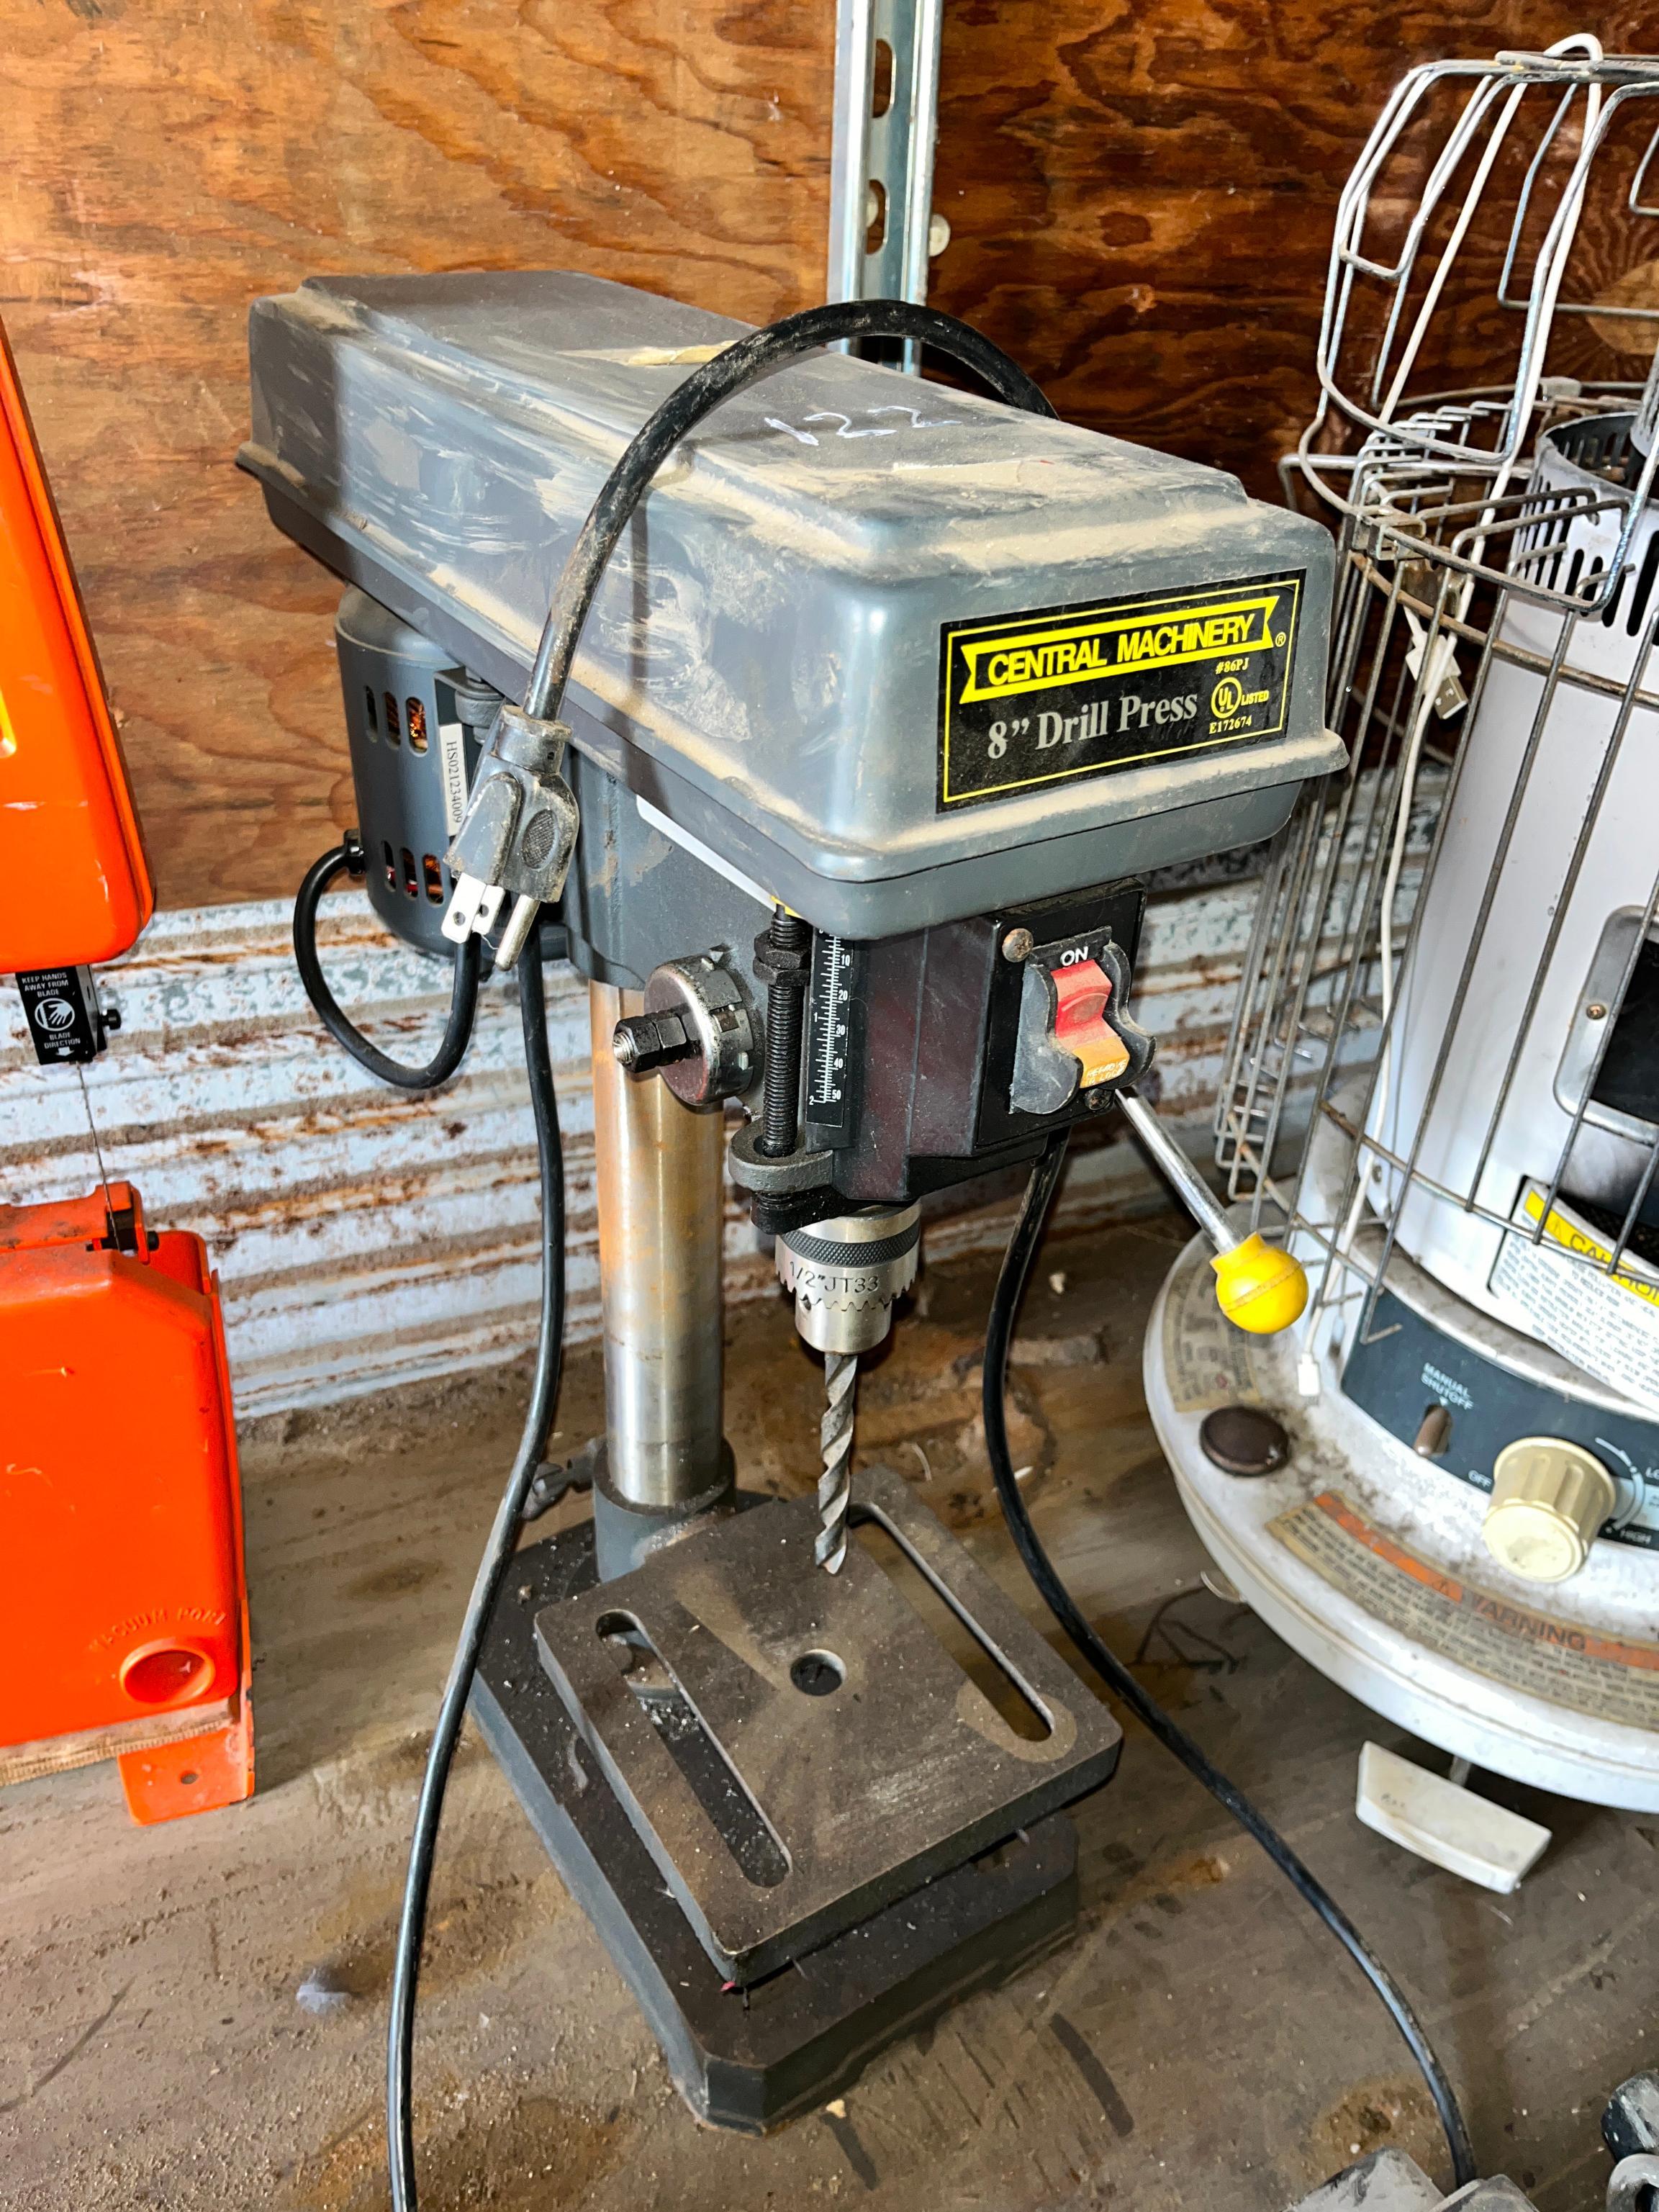 CENTRAL MACHINERY 8” DRILL PRESS SUPPORT EQUIPMENT